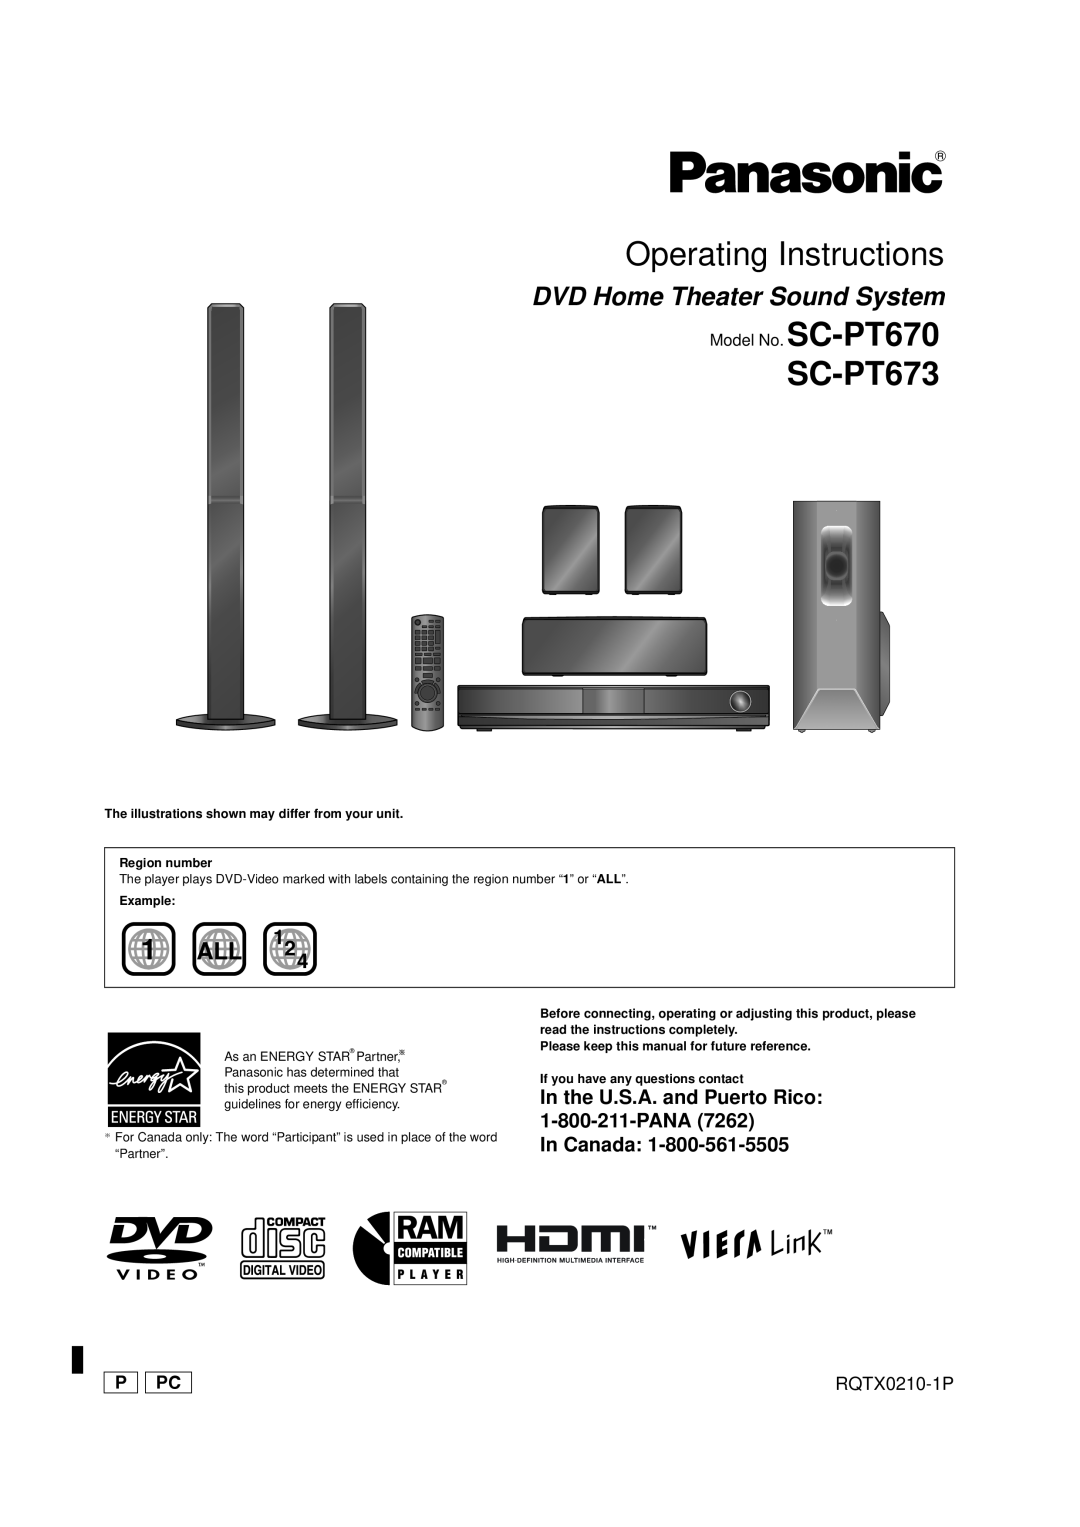 Panasonic SC-PT673 manual DVD Home Theater Sound System, In Canada, RQTX0210-1P, Operating Instructions, 1 ALL, P Pc 